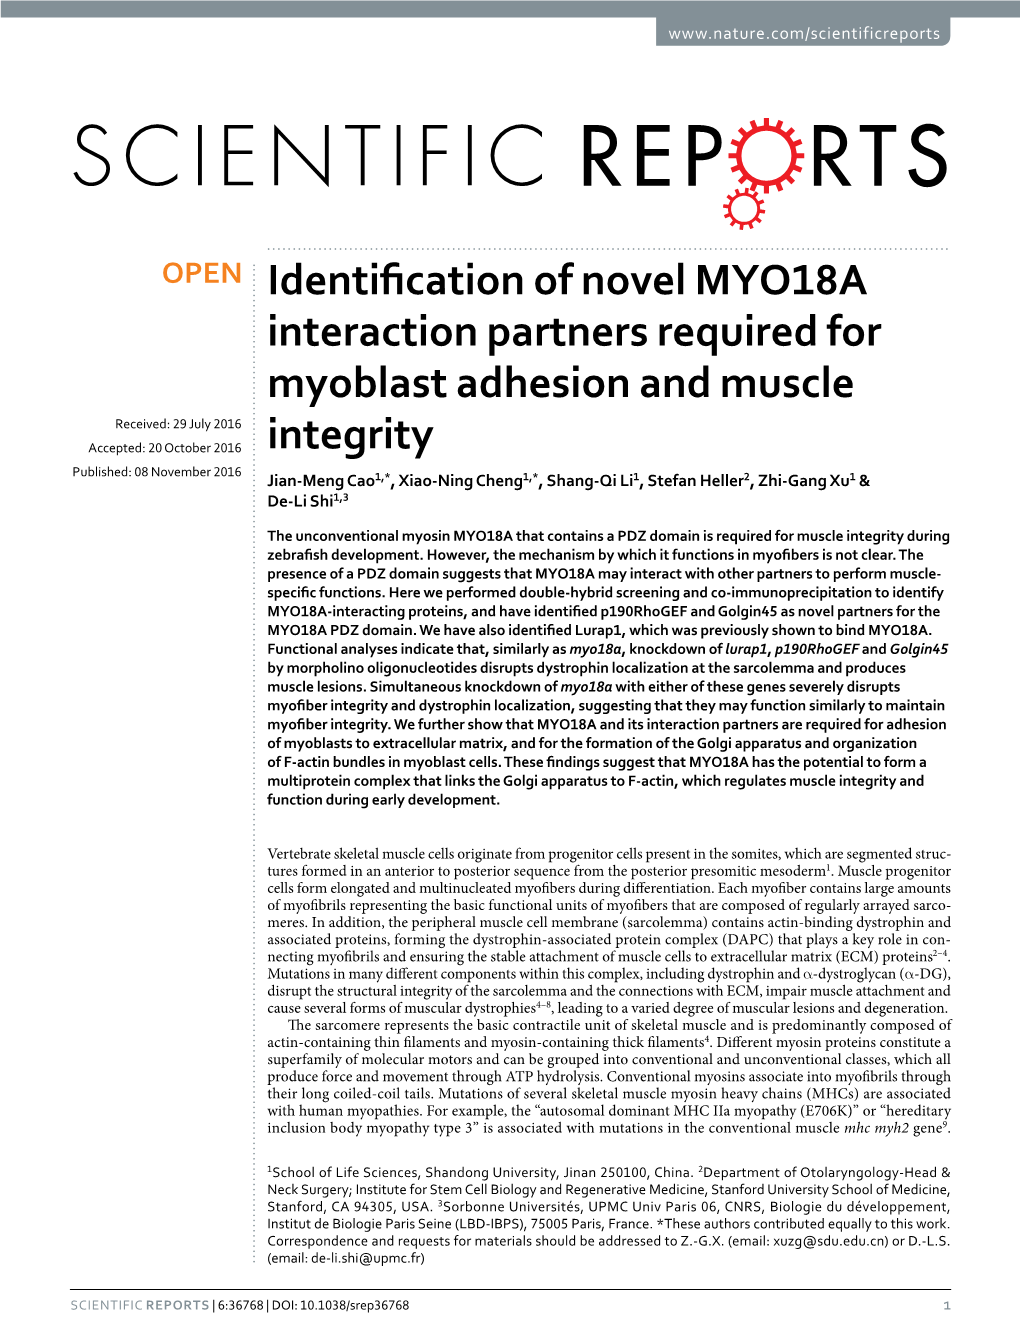 Identification of Novel MYO18A Interaction Partners Required For